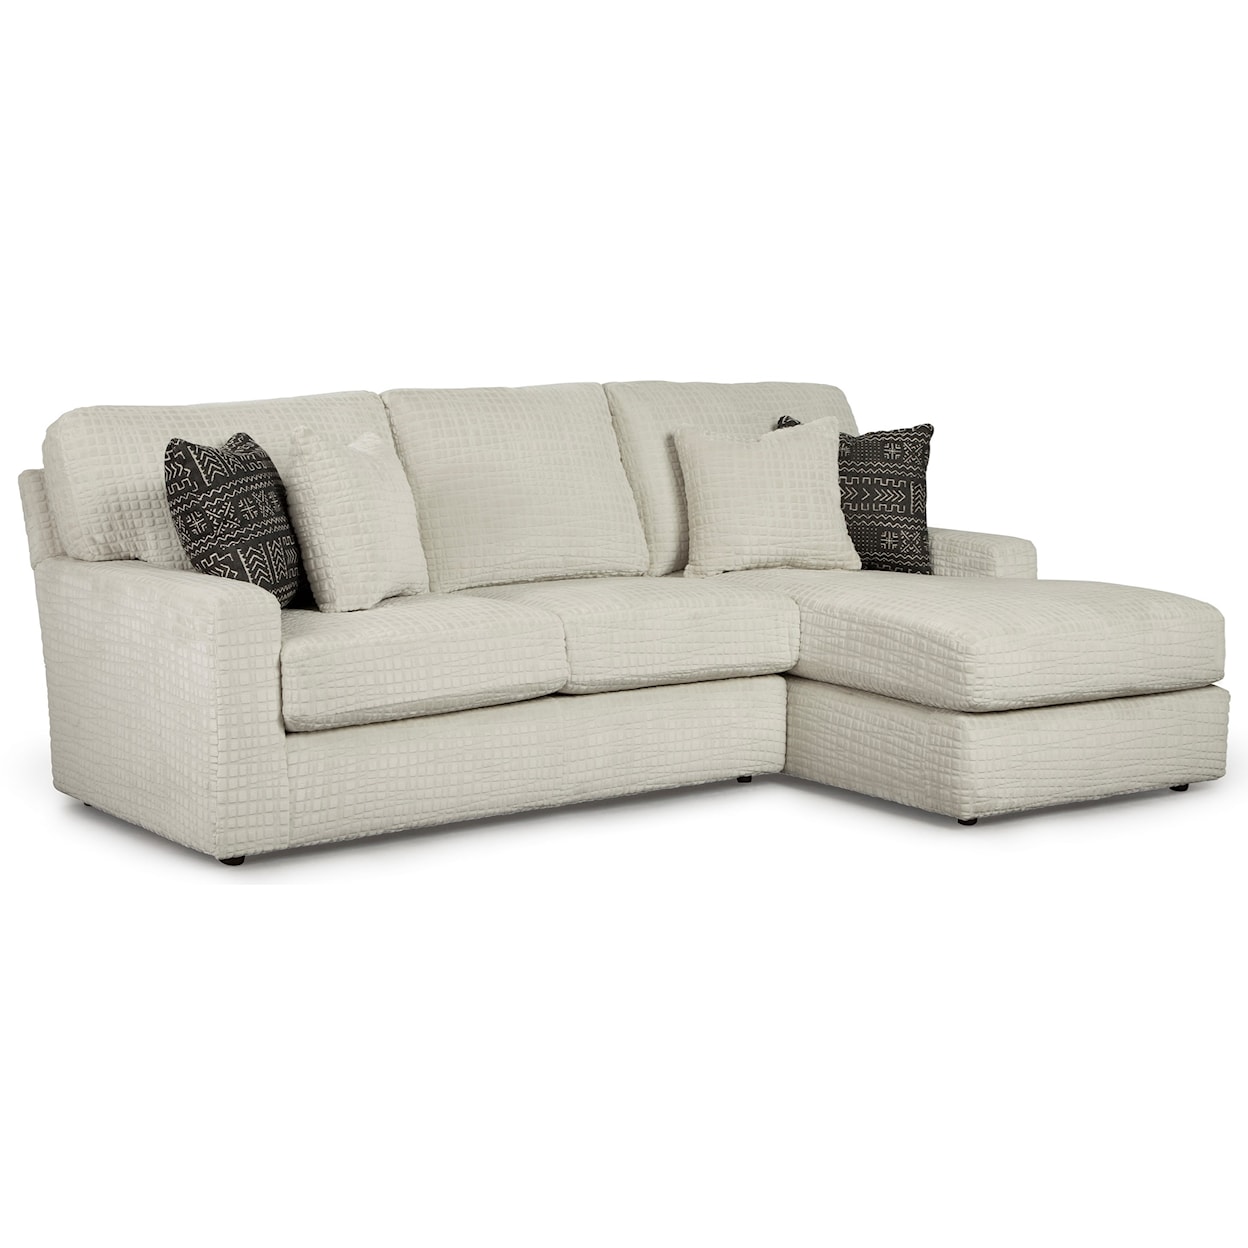 Best Home Furnishings Dovely 2 Piece Sectional Sofa w/ RAF Chaise